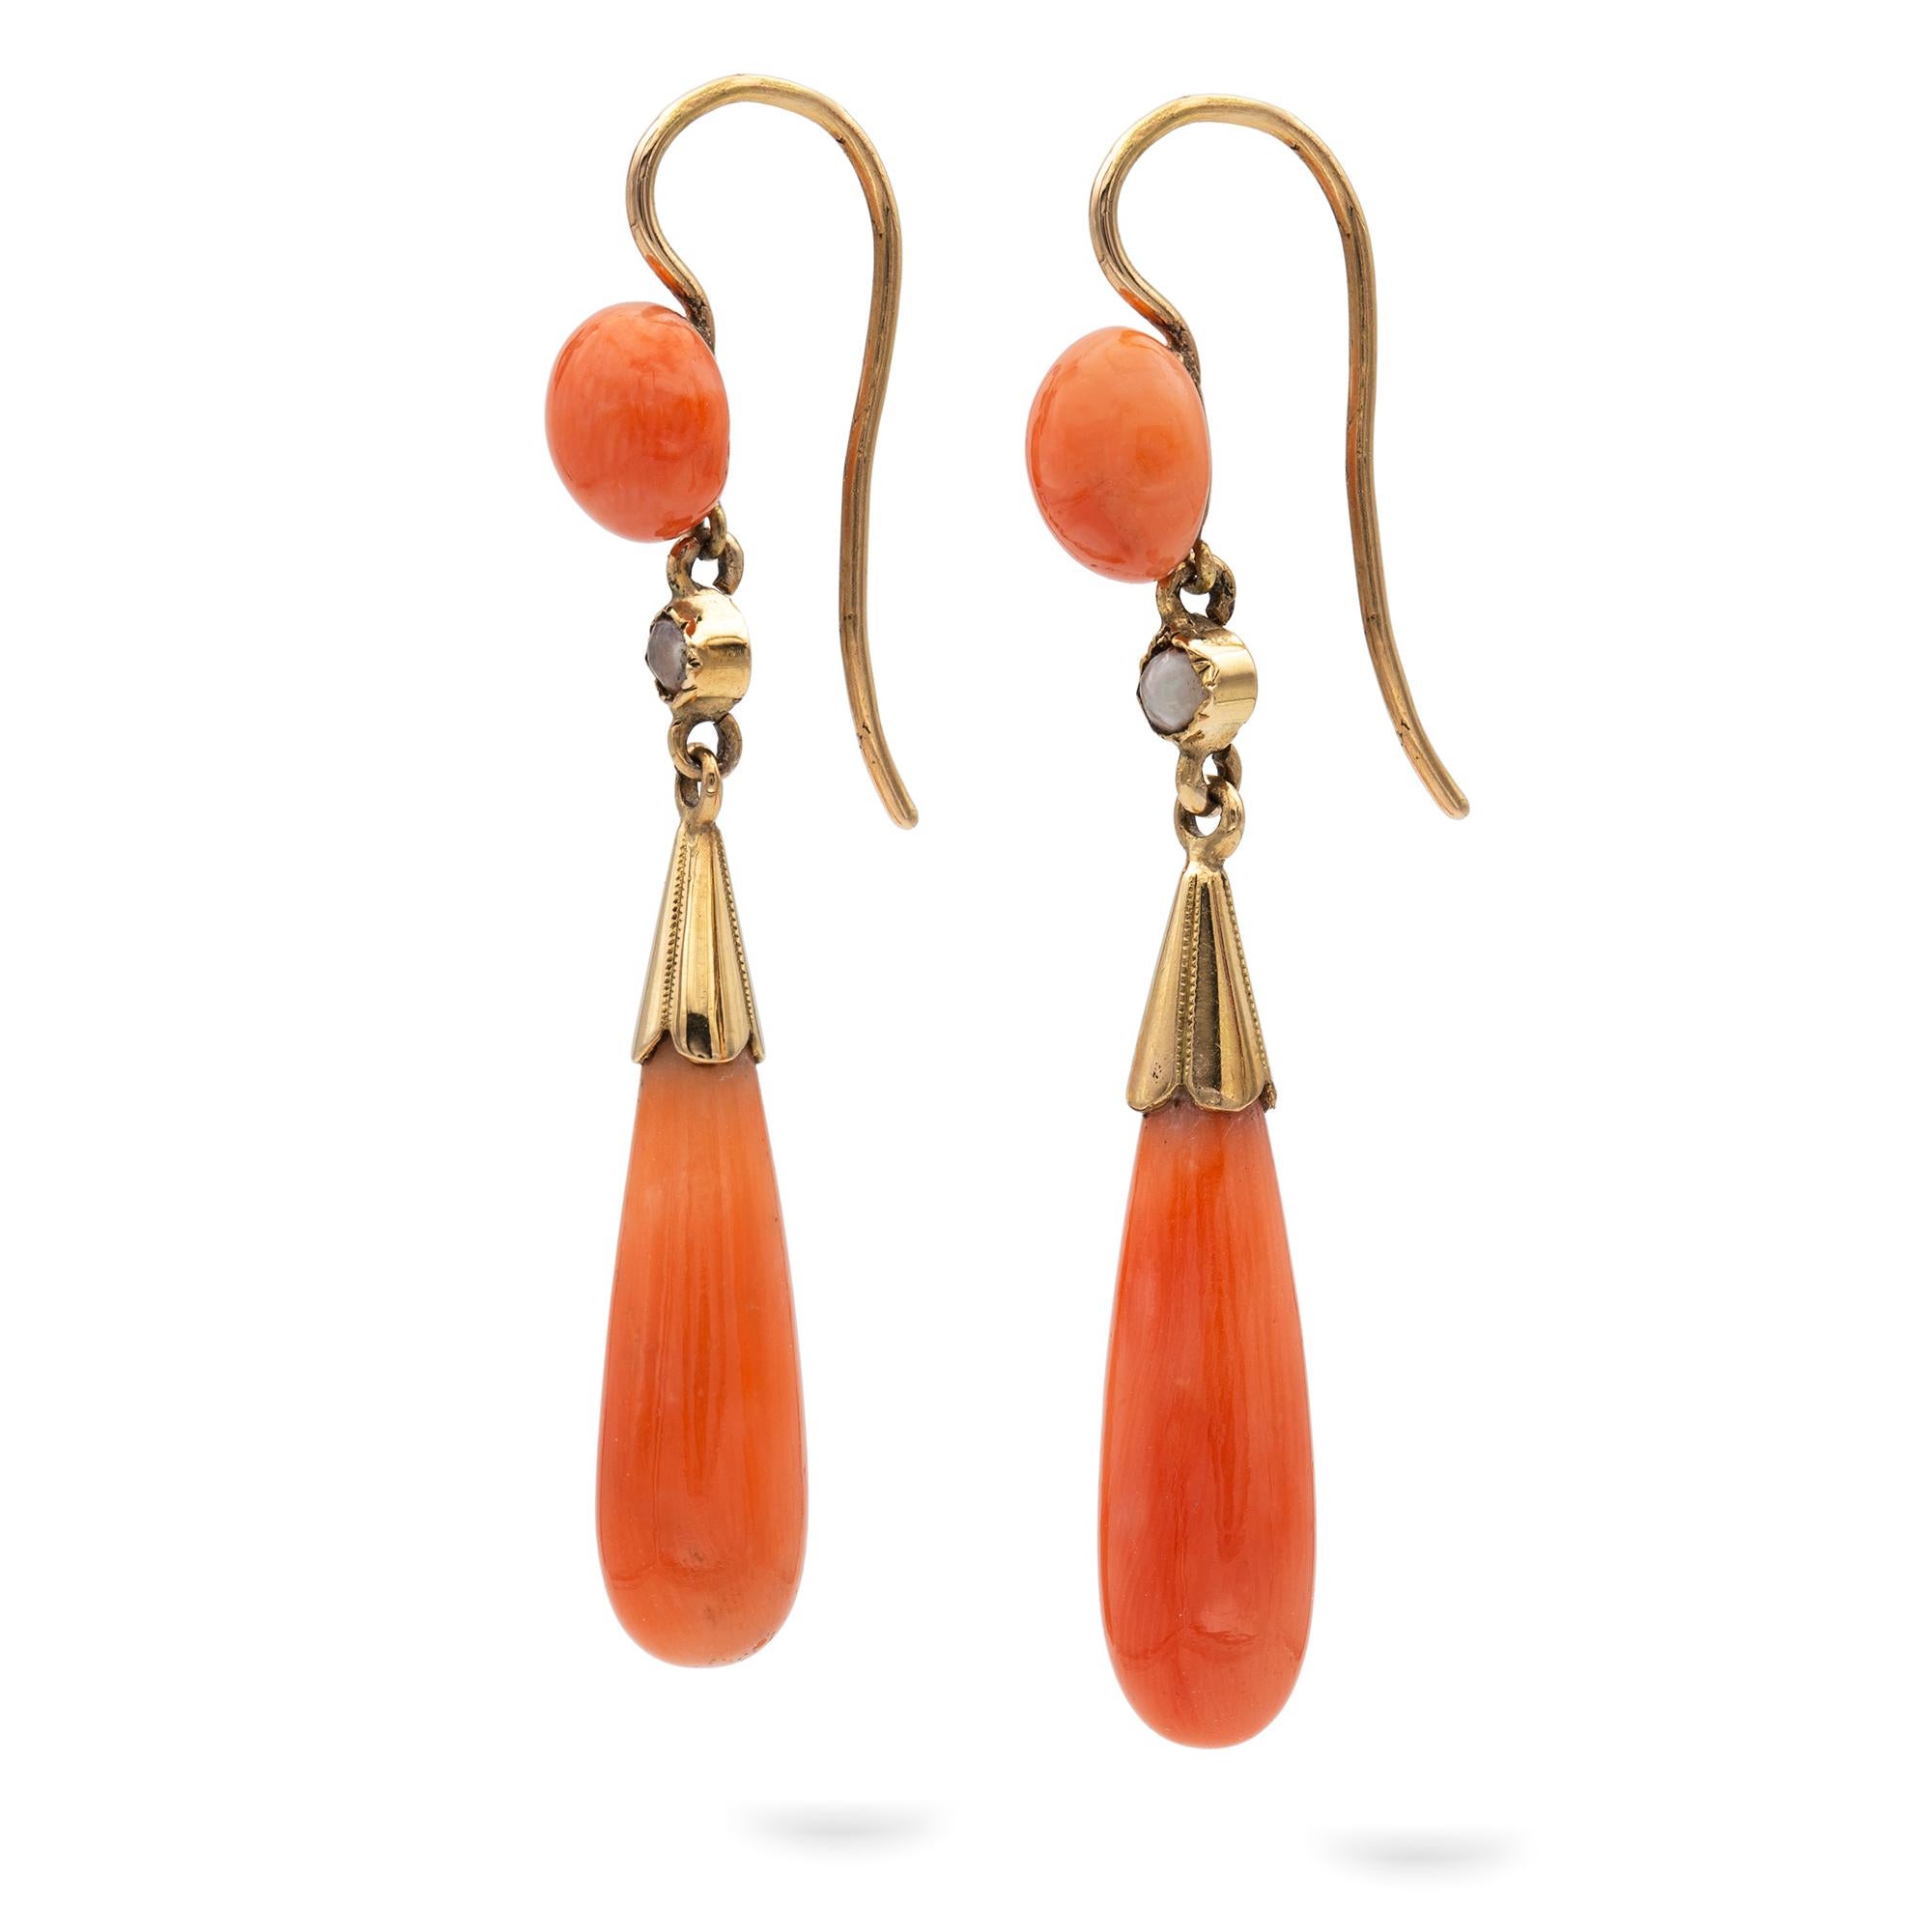 A pair of Victorian coral and pearl drop earrings, each consisted of a button-shaped coral top suspending a pearl and a drop-shaped coral, all mounted in yellow gold, with shepherd-hook  fittings, circa 1890, measuring approximately 4.7cm long, 